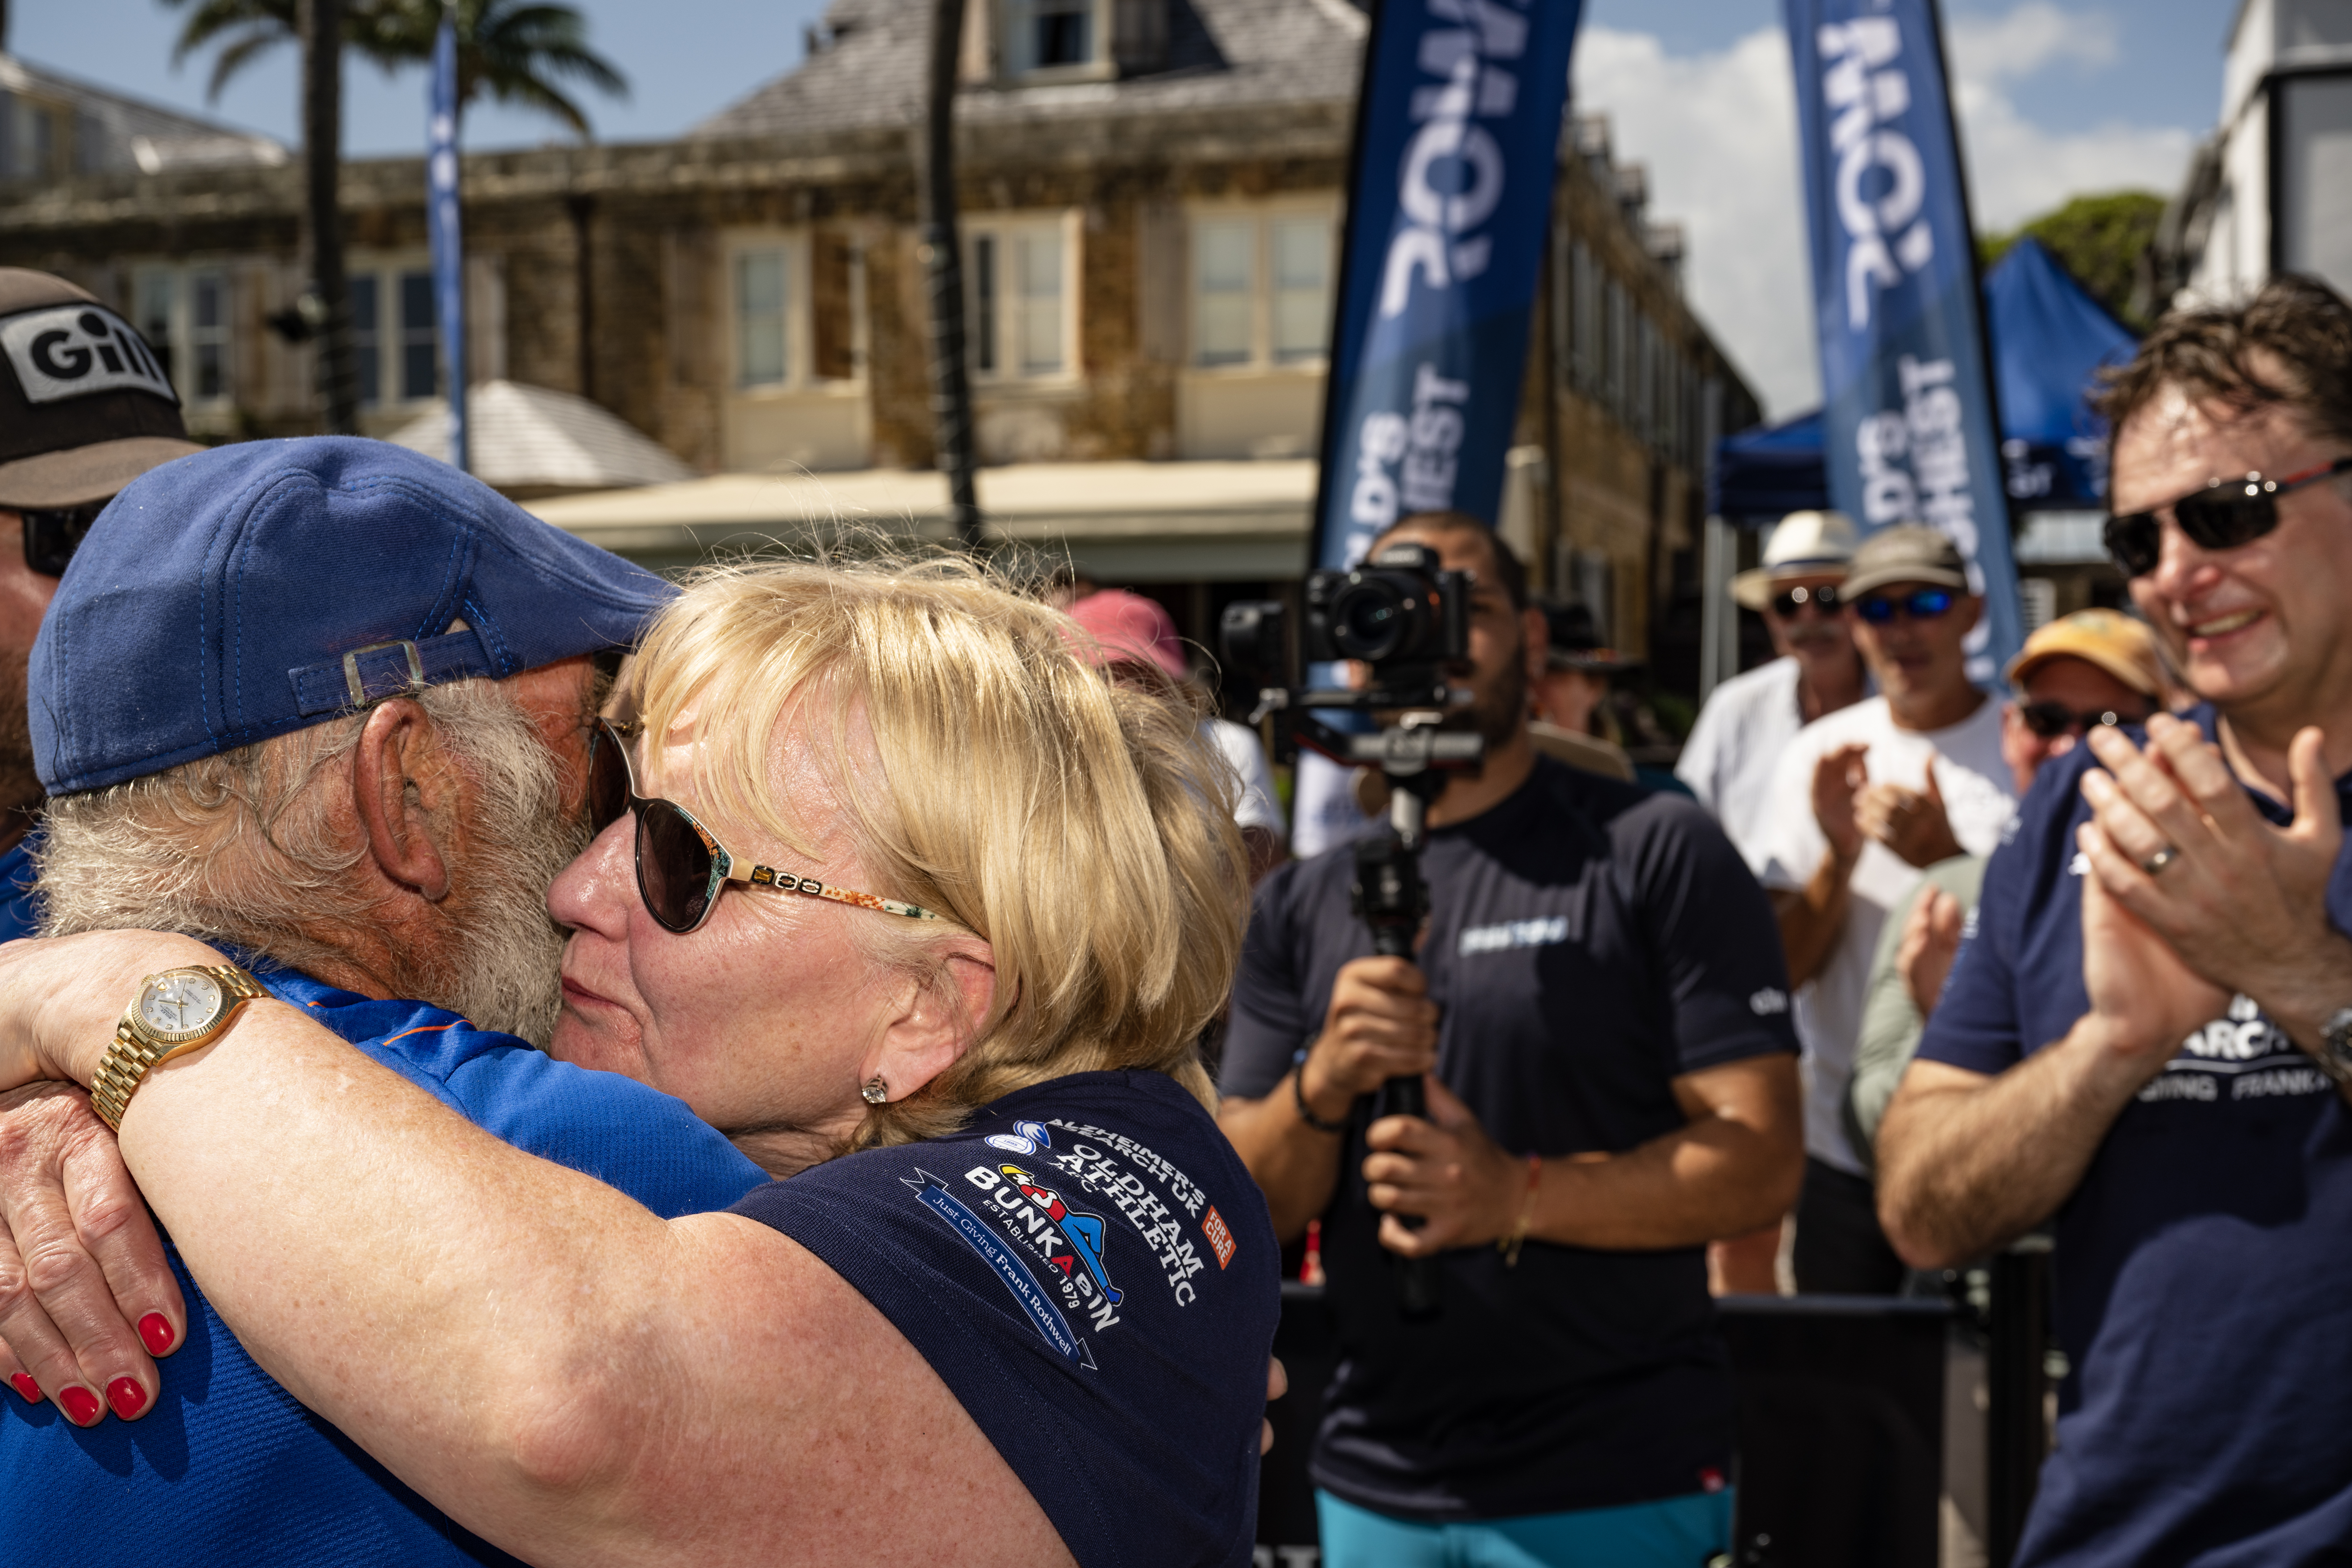 Frank and Judith Rothwell hugging after he completed the challenge 